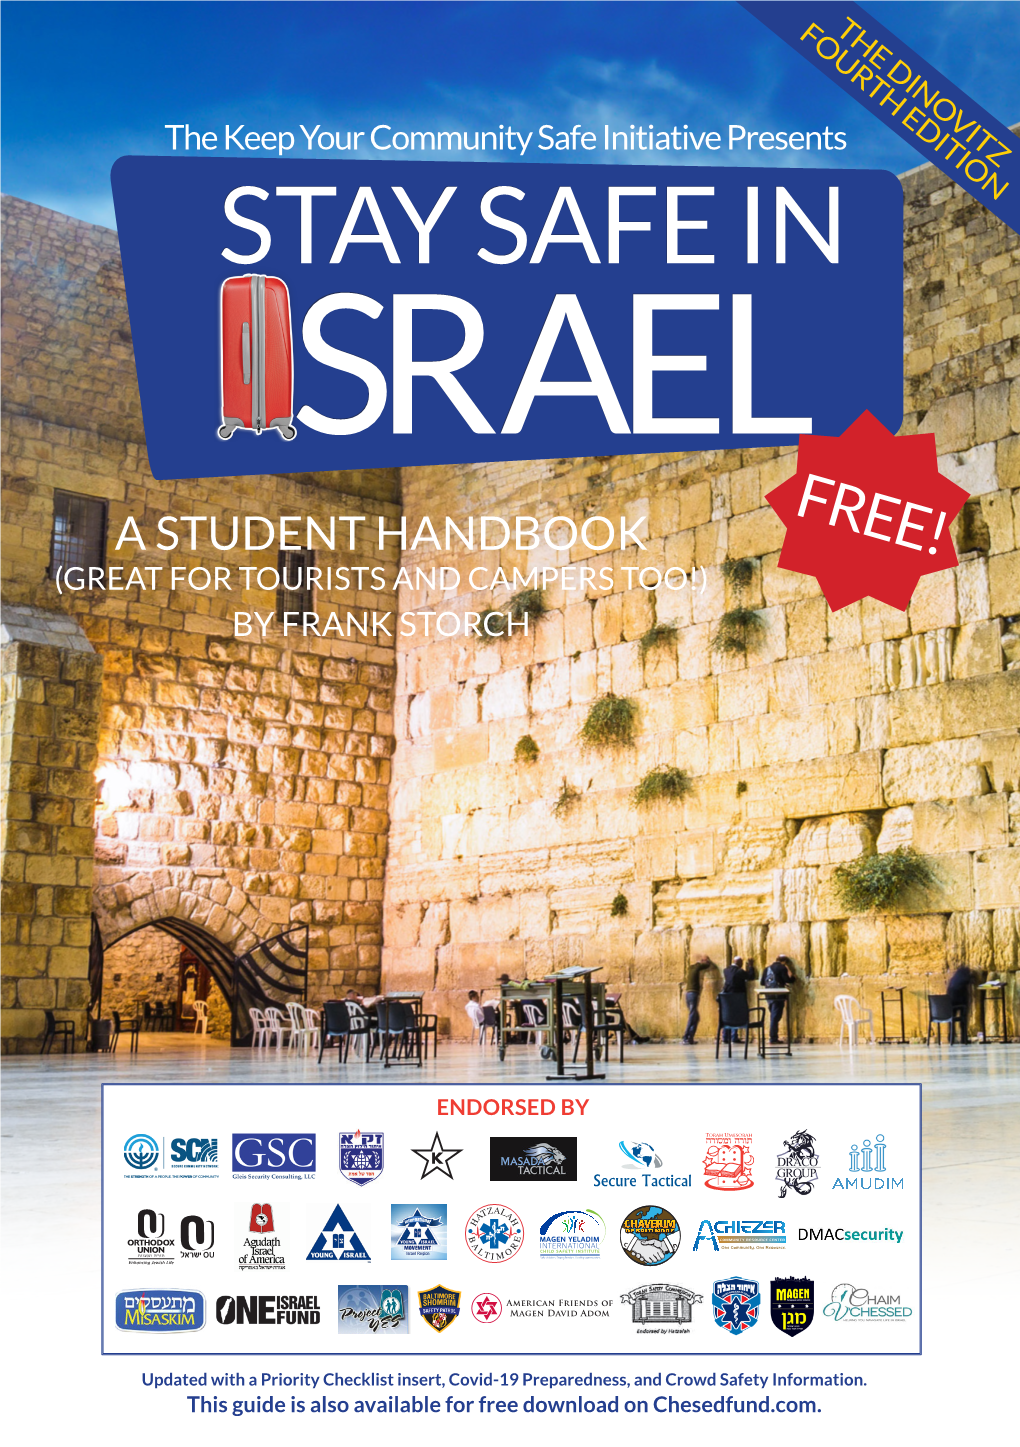 Stay Safe in Srael Free! a Student Handbook (Great for Tourists and Campers Too!) by Frank Storch